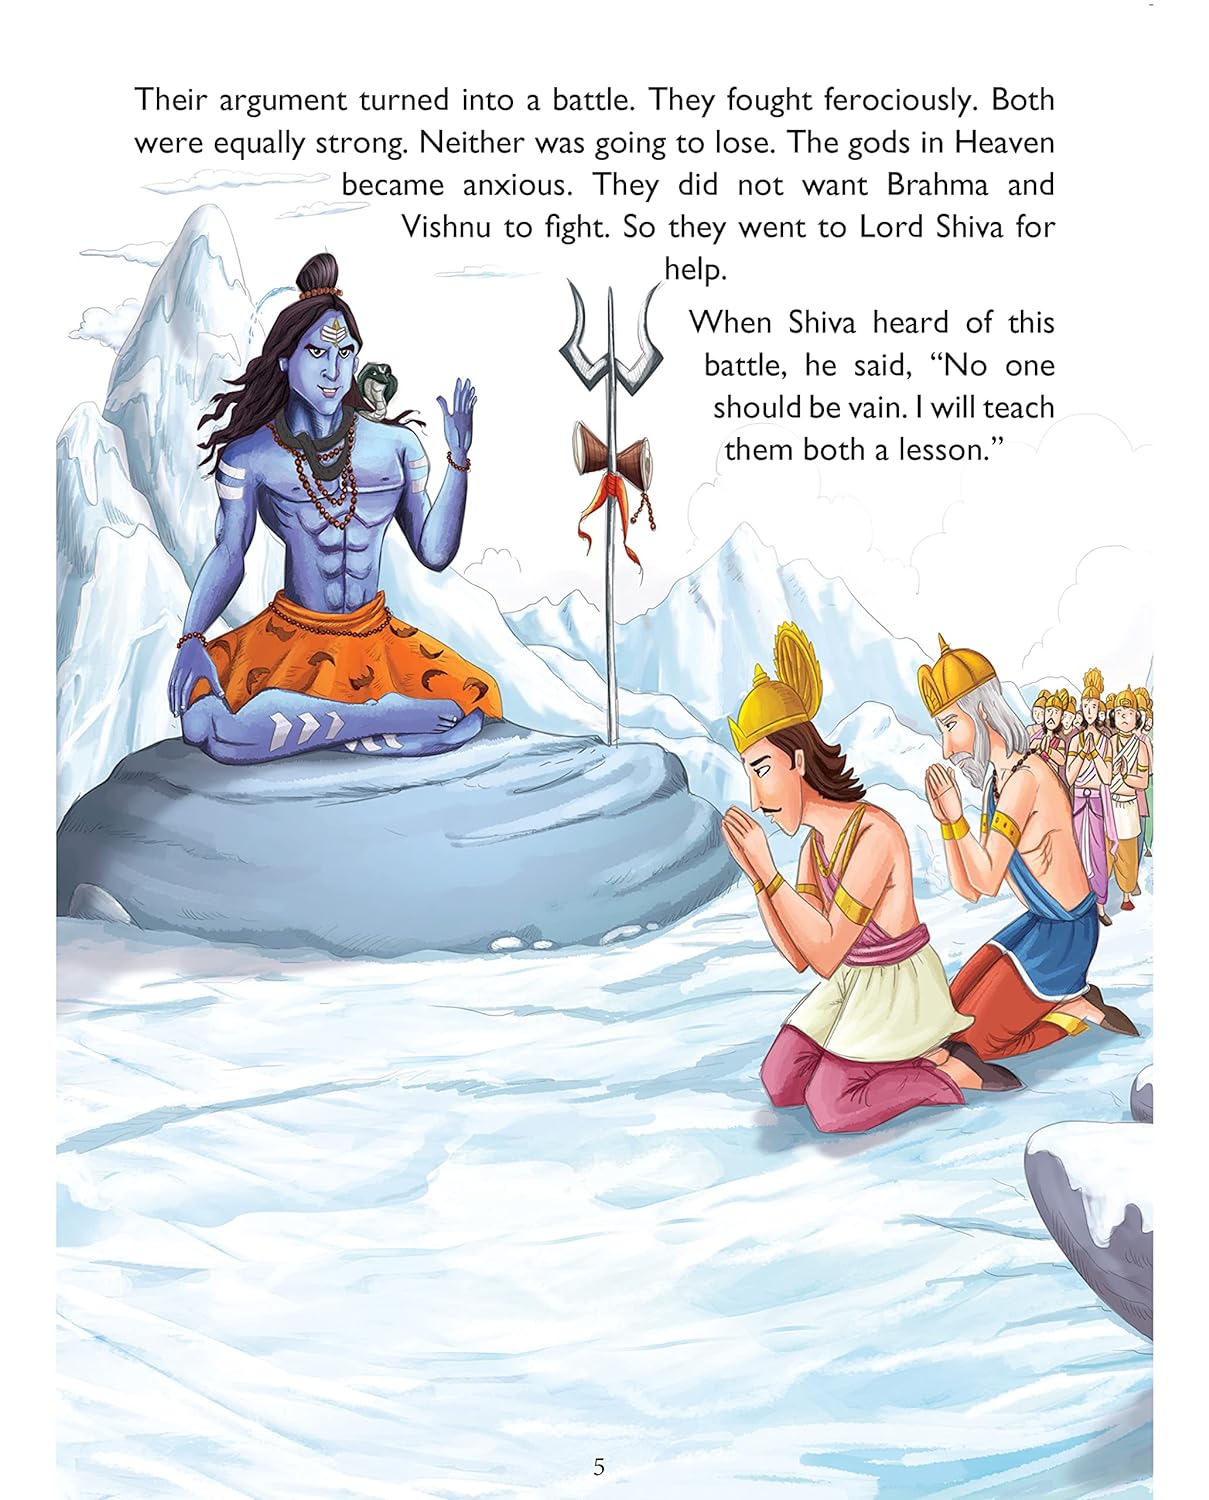 Pegasus Tales of Gracious Lord Shiva - Indian Mythological Stories